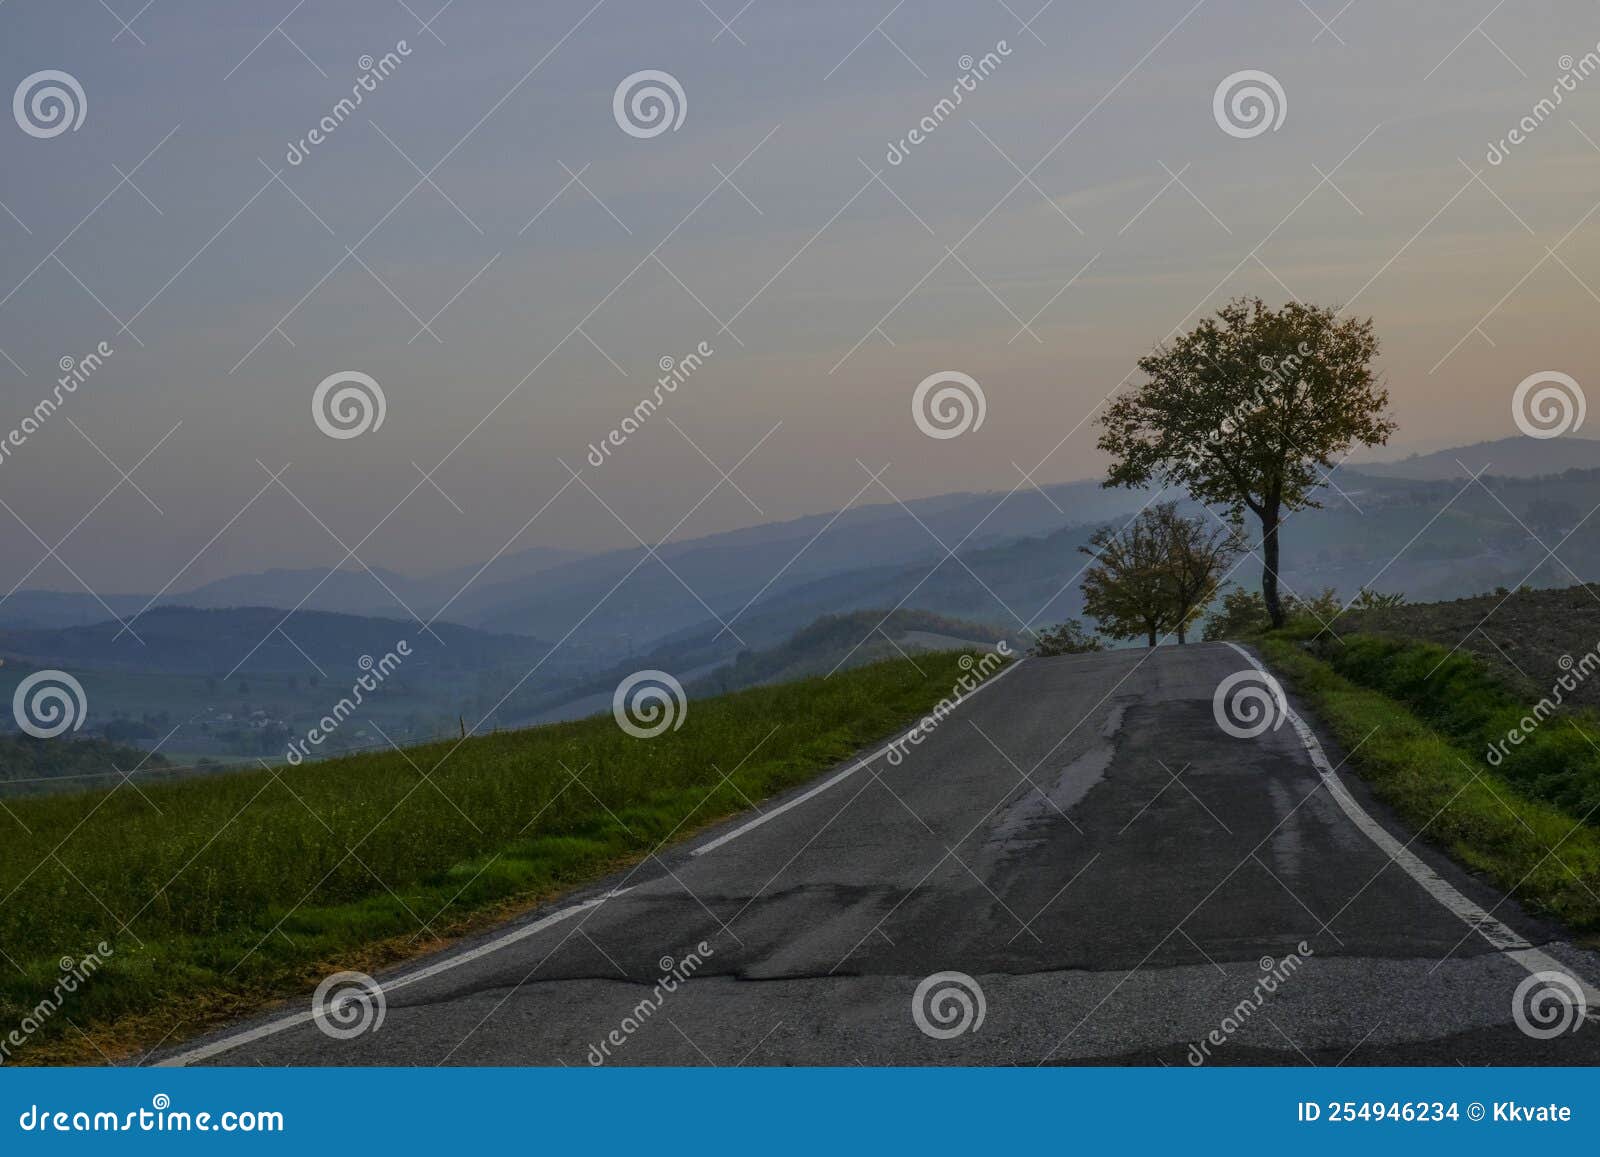 sunrise on the road in the mountains. natural background. appennino tosco-emiliano